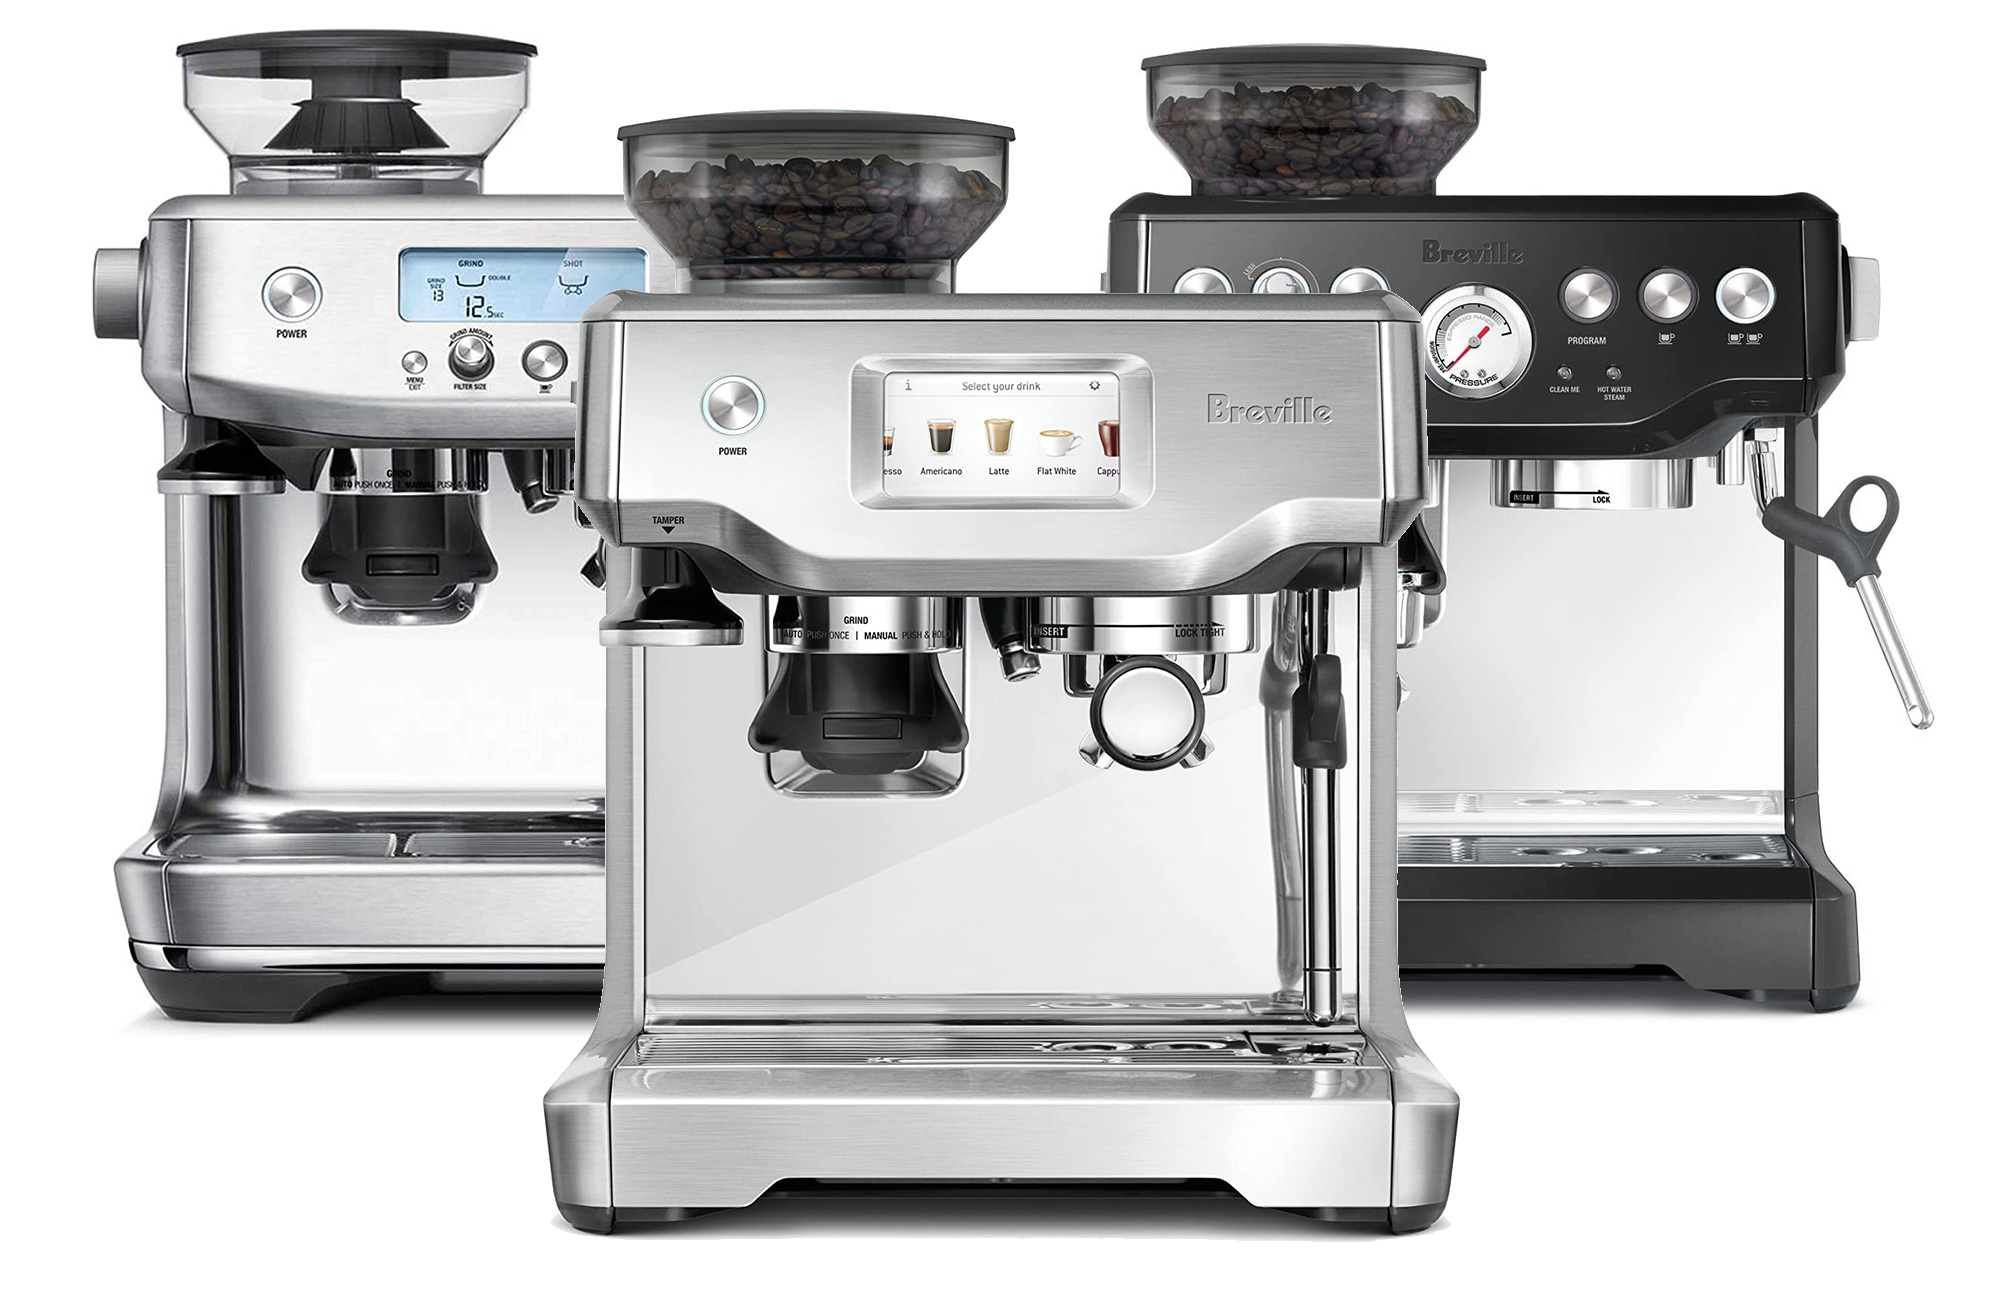 Save up to $200 on pro-grade espresso machines for Mother’s Day at Amazon